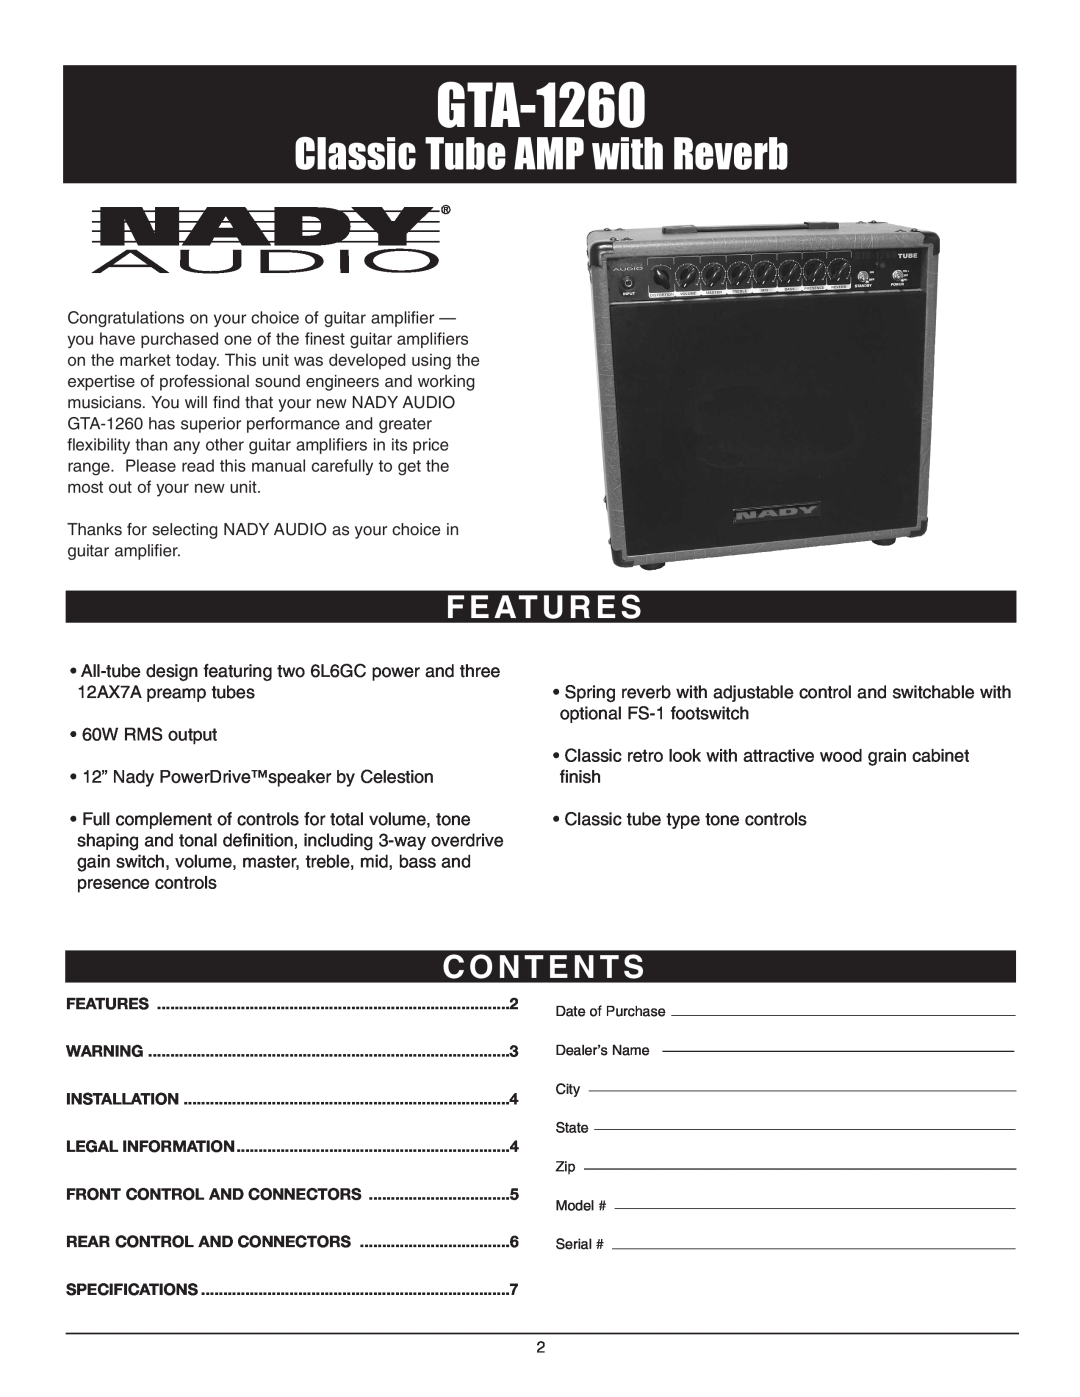 Nady Systems GTA-1260 owner manual F E At U R E S, C O N T E N T S, Classic Tube AMP with Reverb 